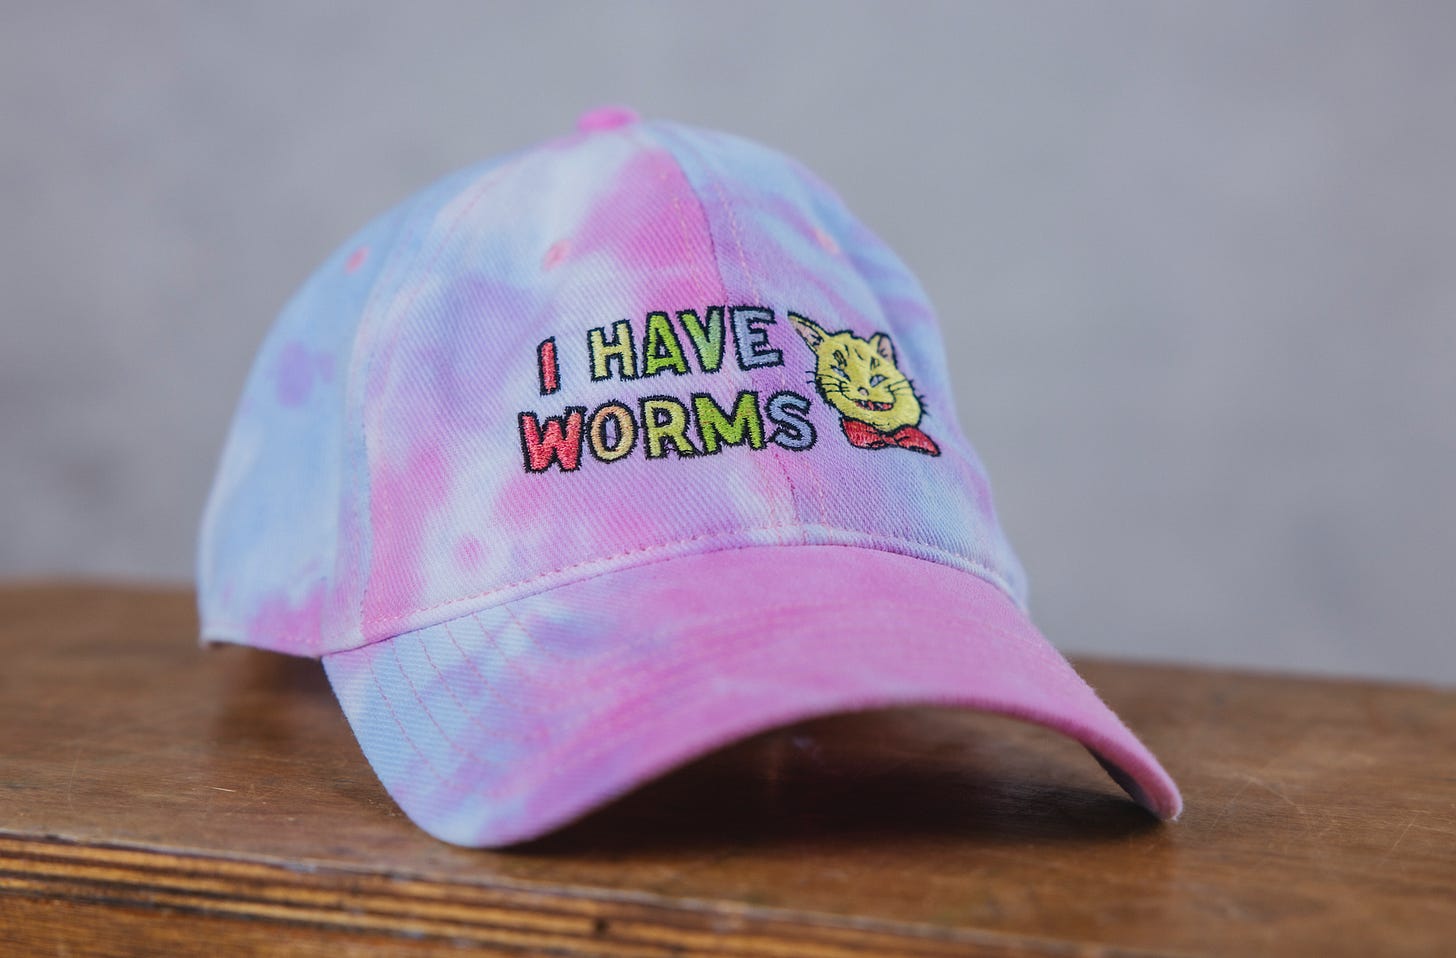 Tie dye rainbow cap, with I HAVE WORMS printed on it